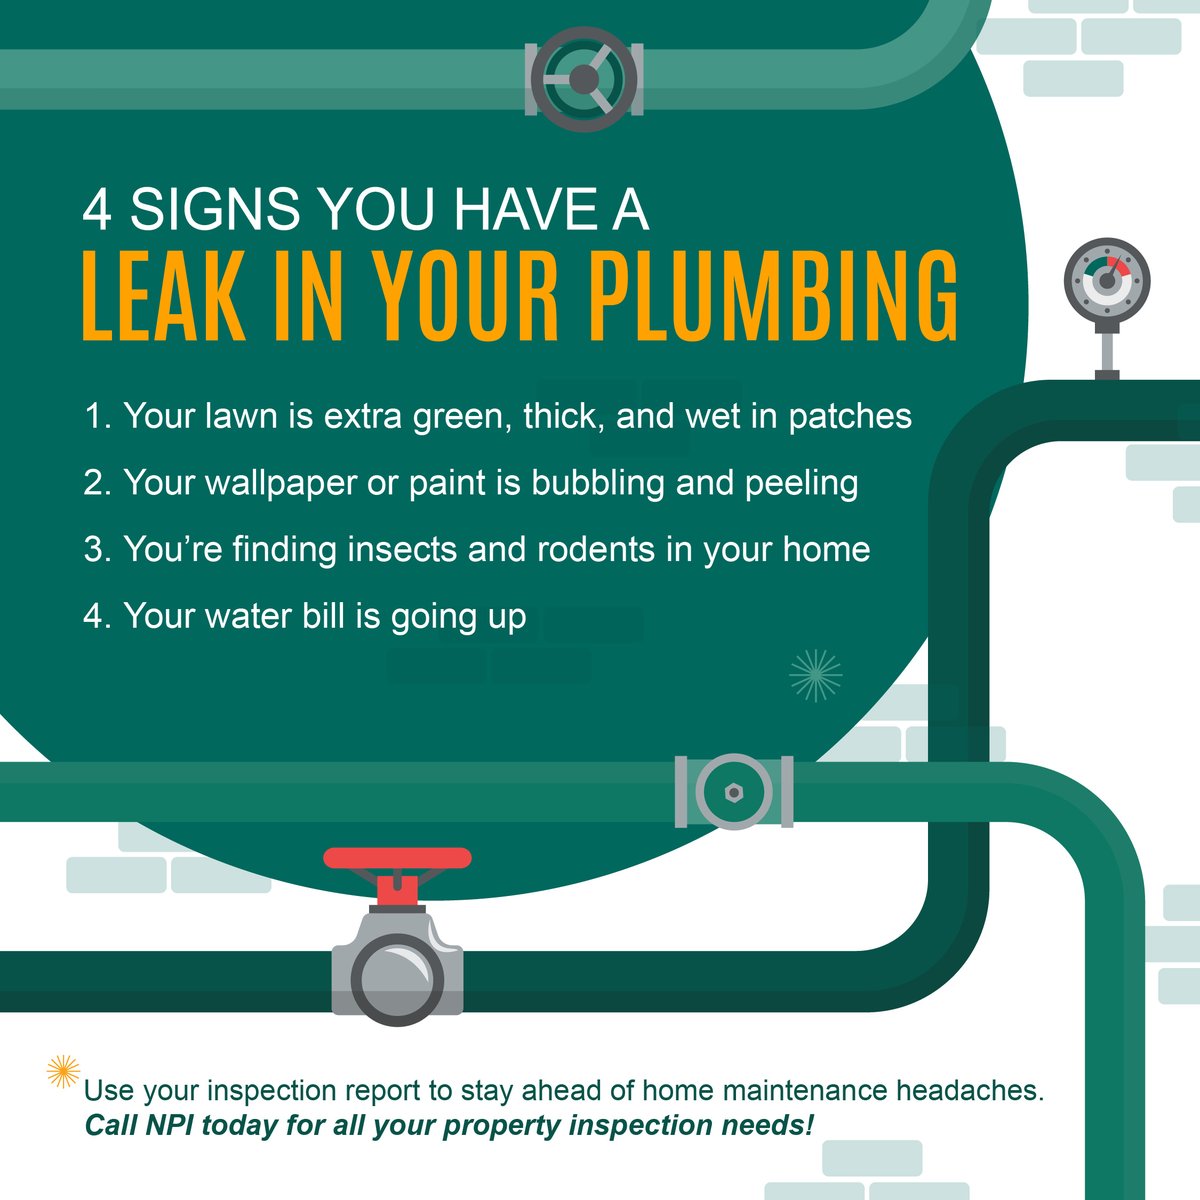 Not all of your home's plumbing leaks are immediately evident, but a trained eye can catch these issues early on. Here are a few unconventional ways that you can identify plumbing problems! #npihome #plumbing #homemaintenance